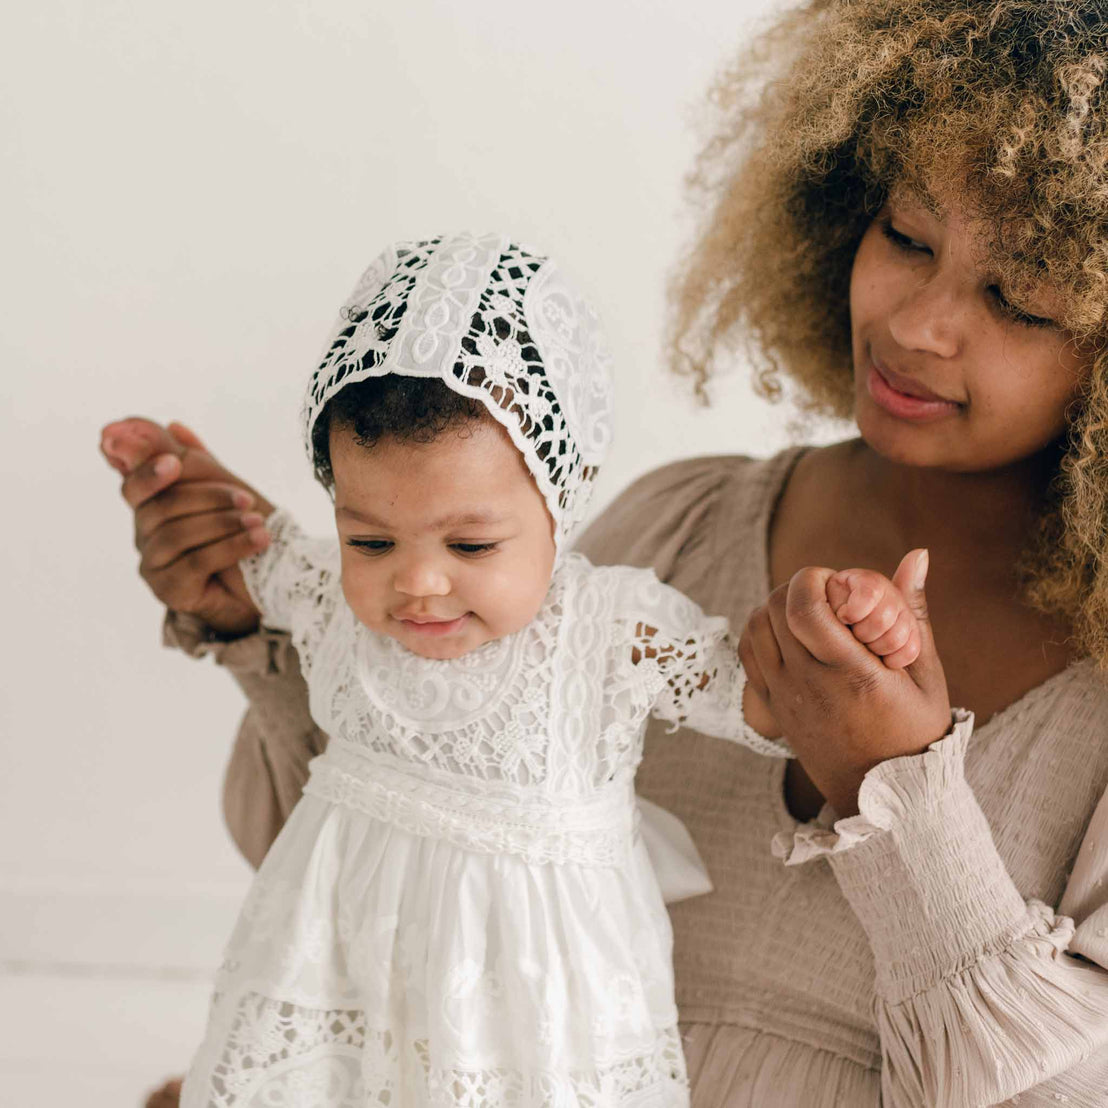 A woman with curly hair smiles as she gently holds the hands of a baby dressed in the Adeline Lace Christening Gown & Bonnet, adorned with delicate cotton lace. The baby looks down, and they both seem to be enjoying a tender moment in a simple, light-colored setting.